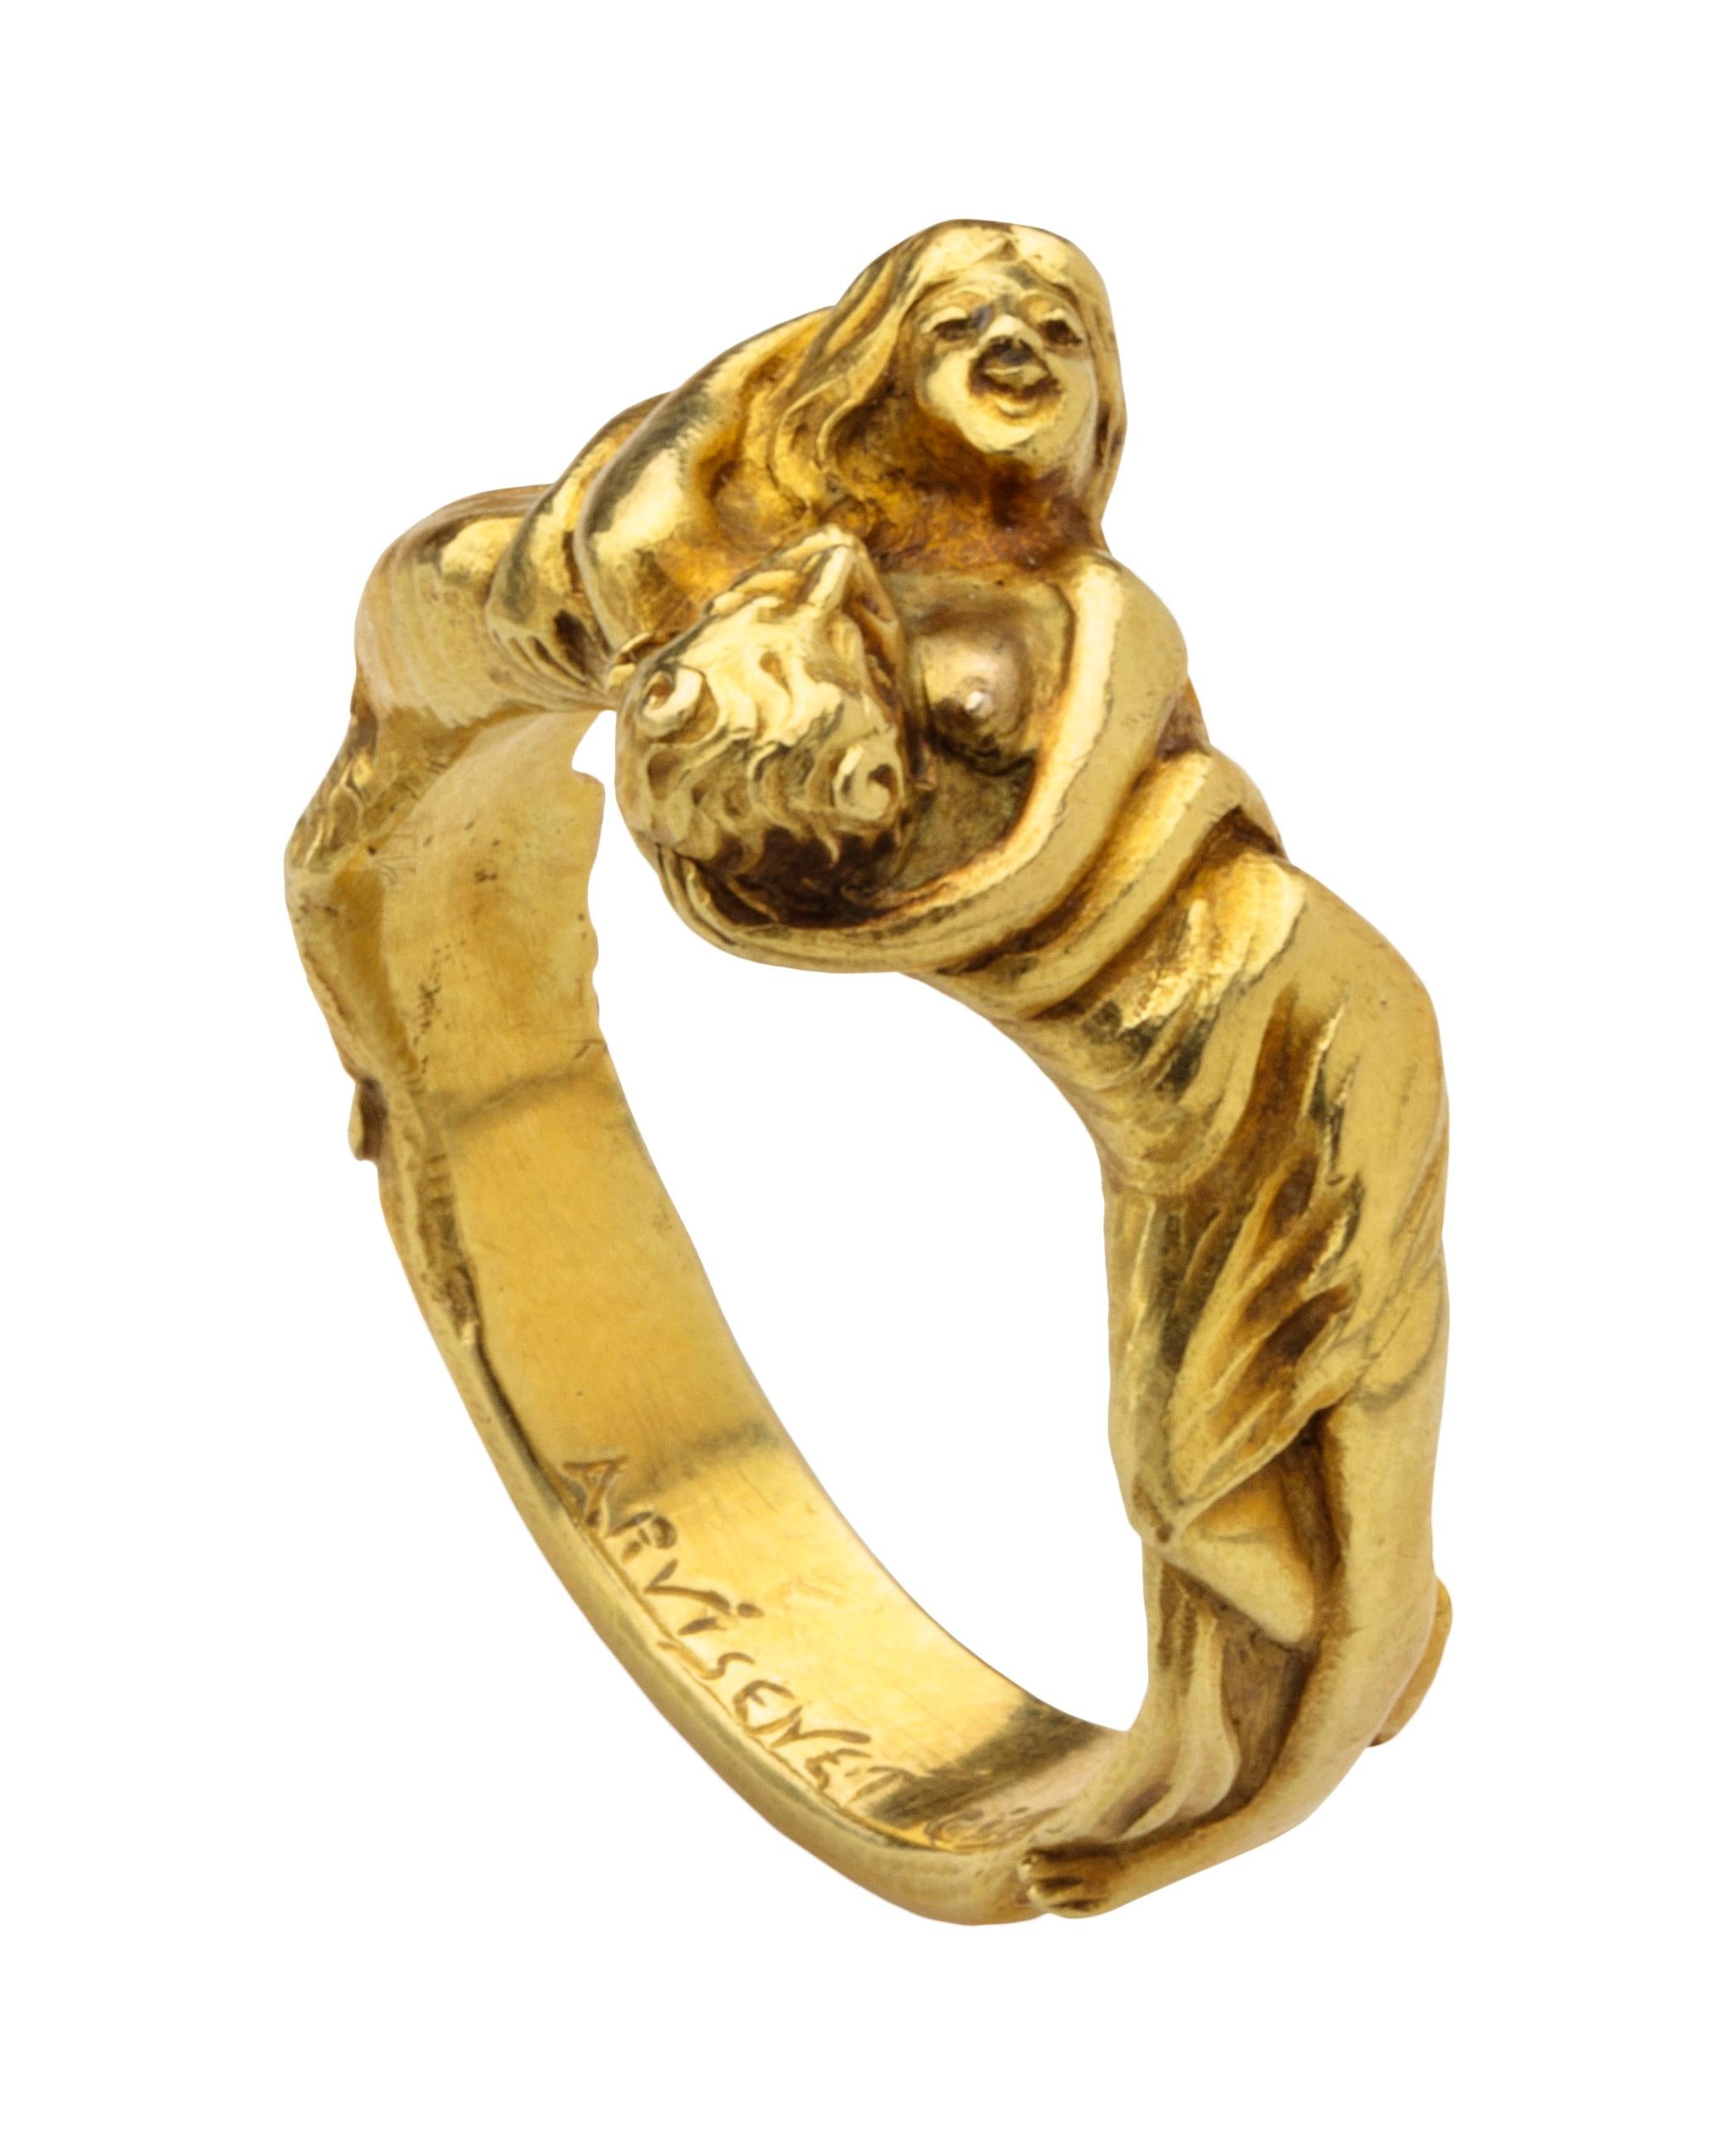 ART NOUVEAU NYMPH AND SATYR RING BY ARVISENET 
France, Paris?, c. 1900 
Gold 
Weight 17 gr., US size 10.5, UK size U ½ 

This sculptural ring is cast in gold and finely chased. The hoop is flat inside, while outside two entwined figures form the